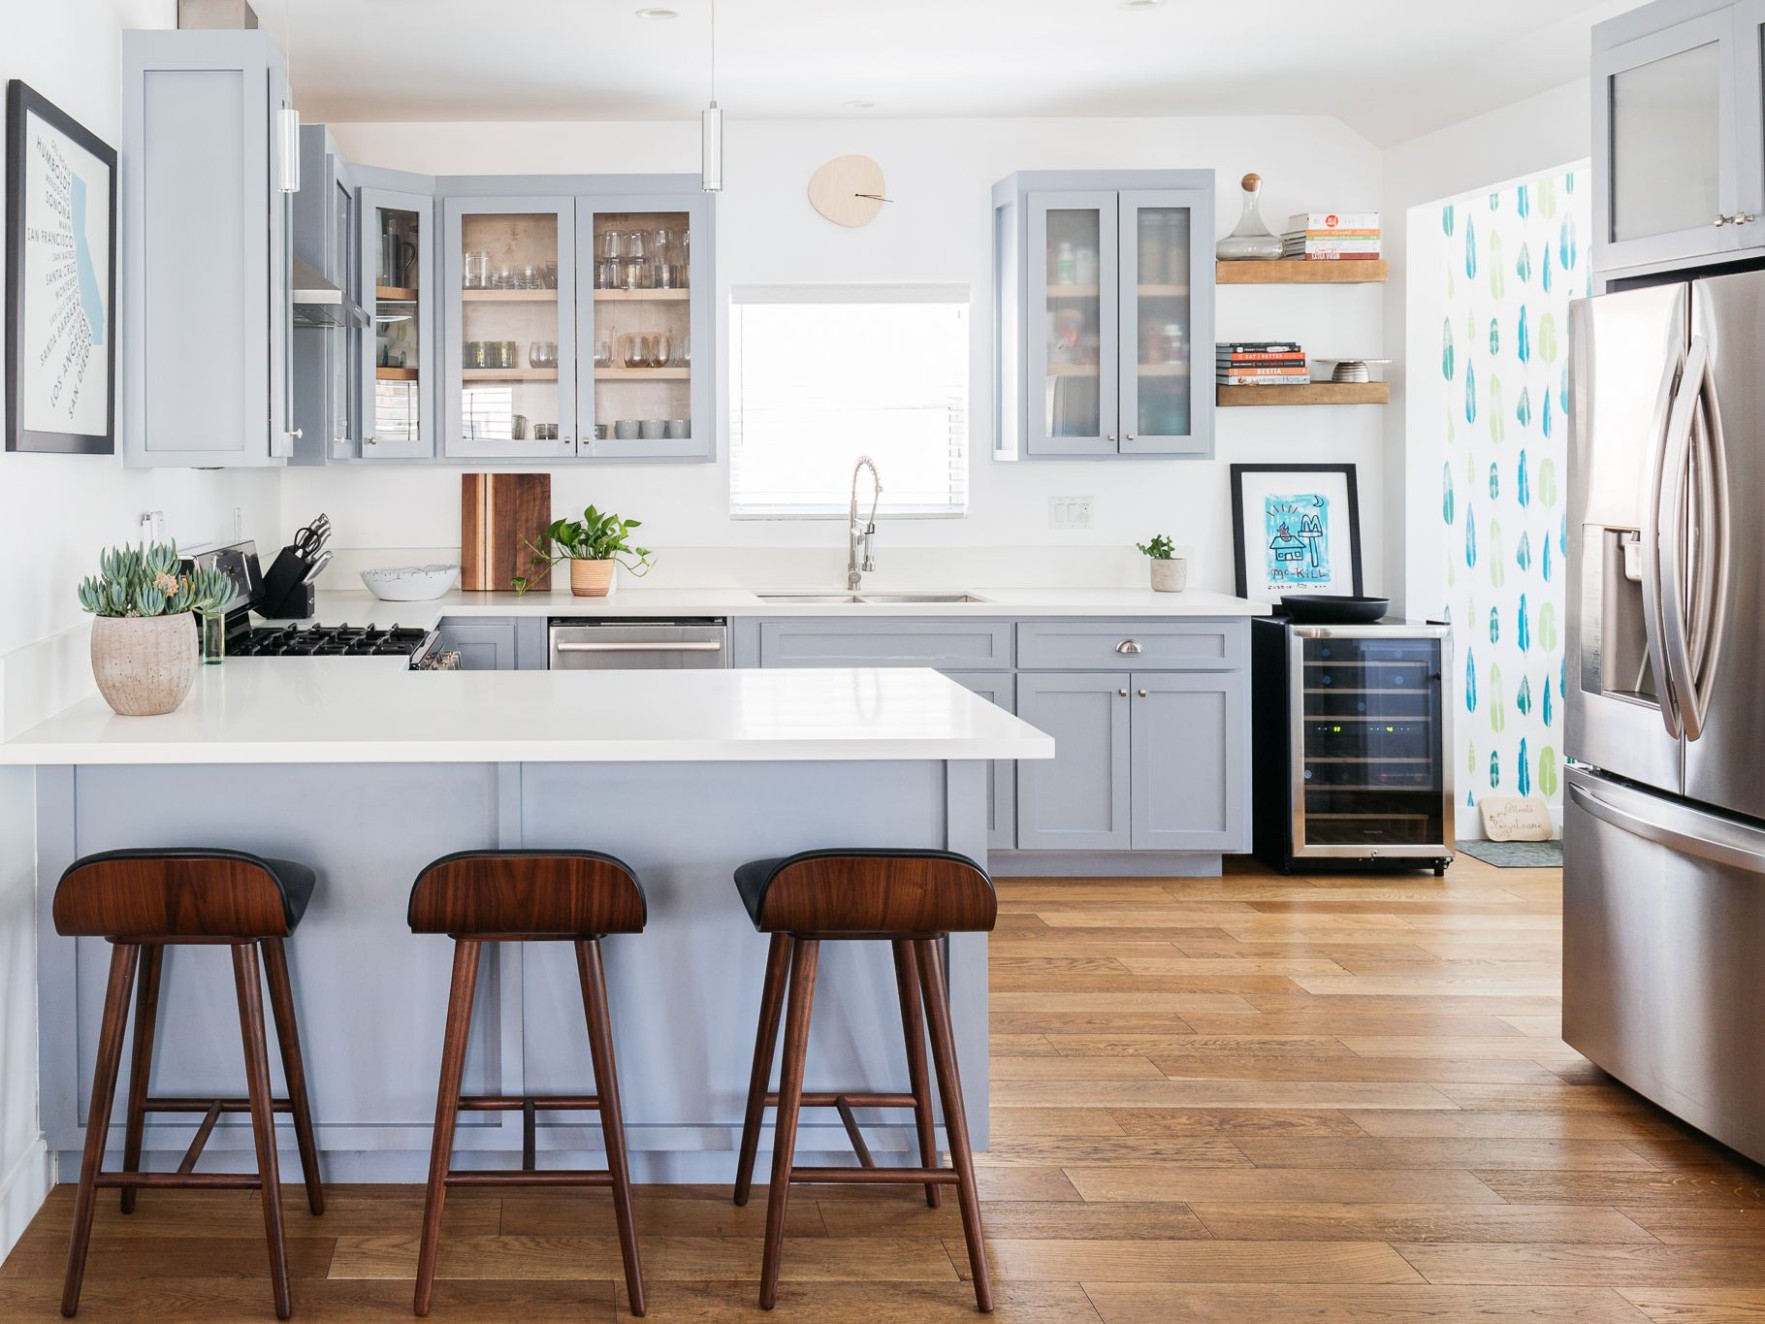 5 Small Kitchen Ideas That Prove That Less Is More - what size is a small kitchen?